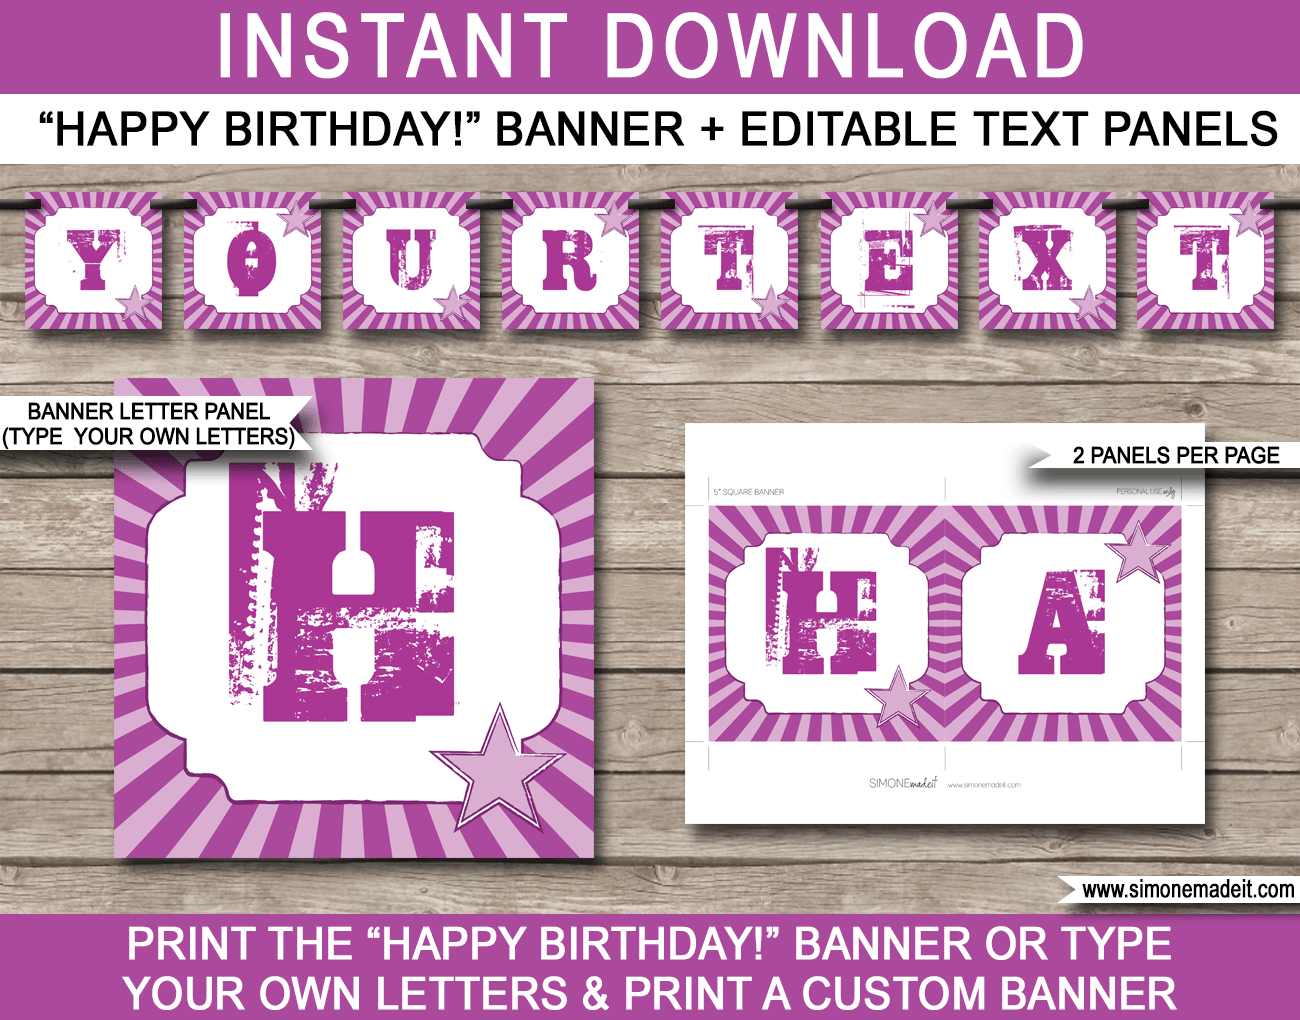 Purple Rock Star Party Banner Template - Bunting - Happy Birthday Banner - Birthday Party - Editable and Printable DIY Template - INSTANT DOWNLOAD $4.50 via simonemadeit.com